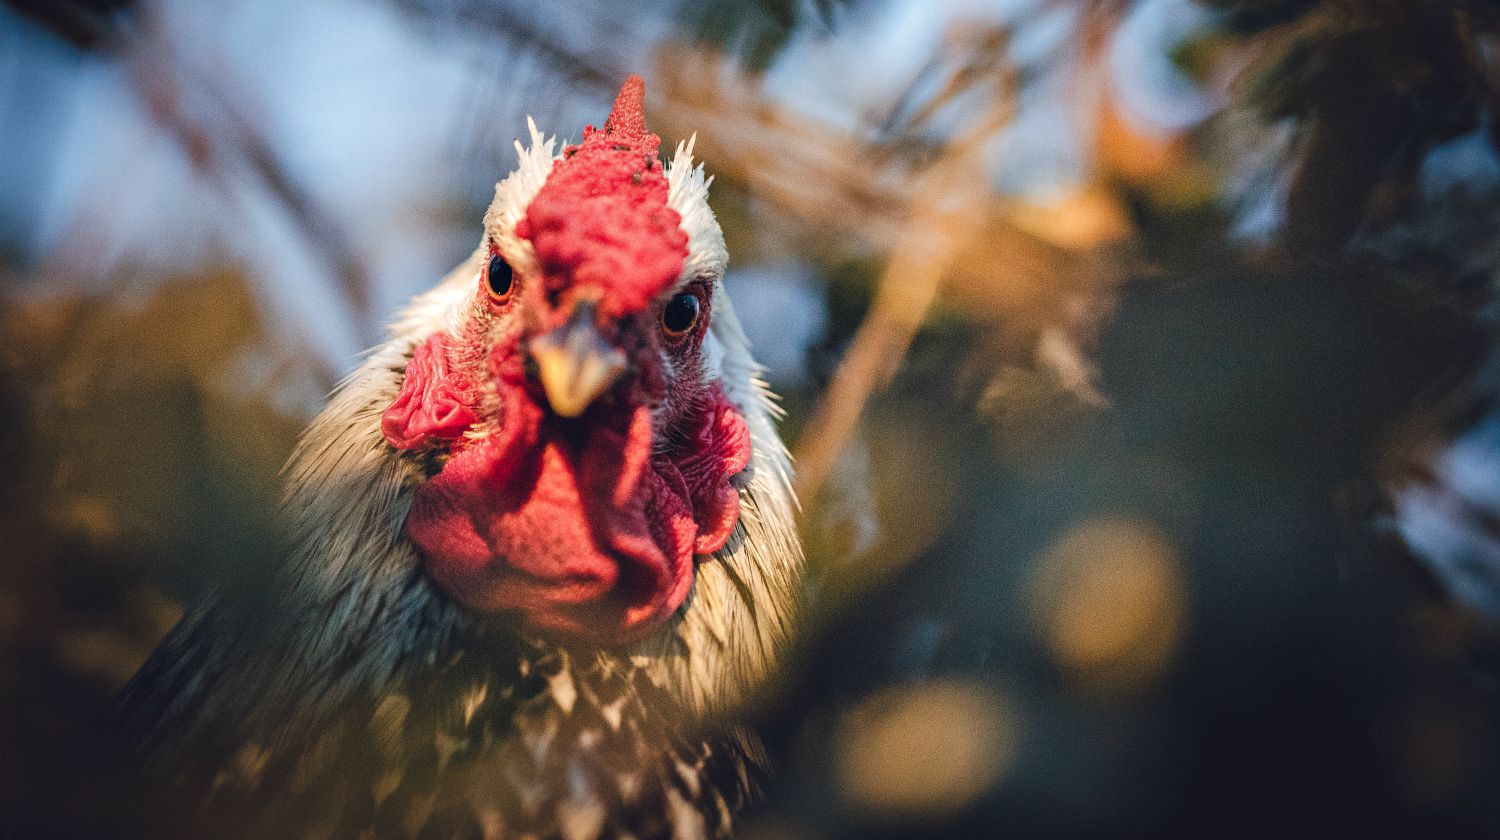 Feature | Red and white rooster in fields | Human Diseases Caused By Chickens